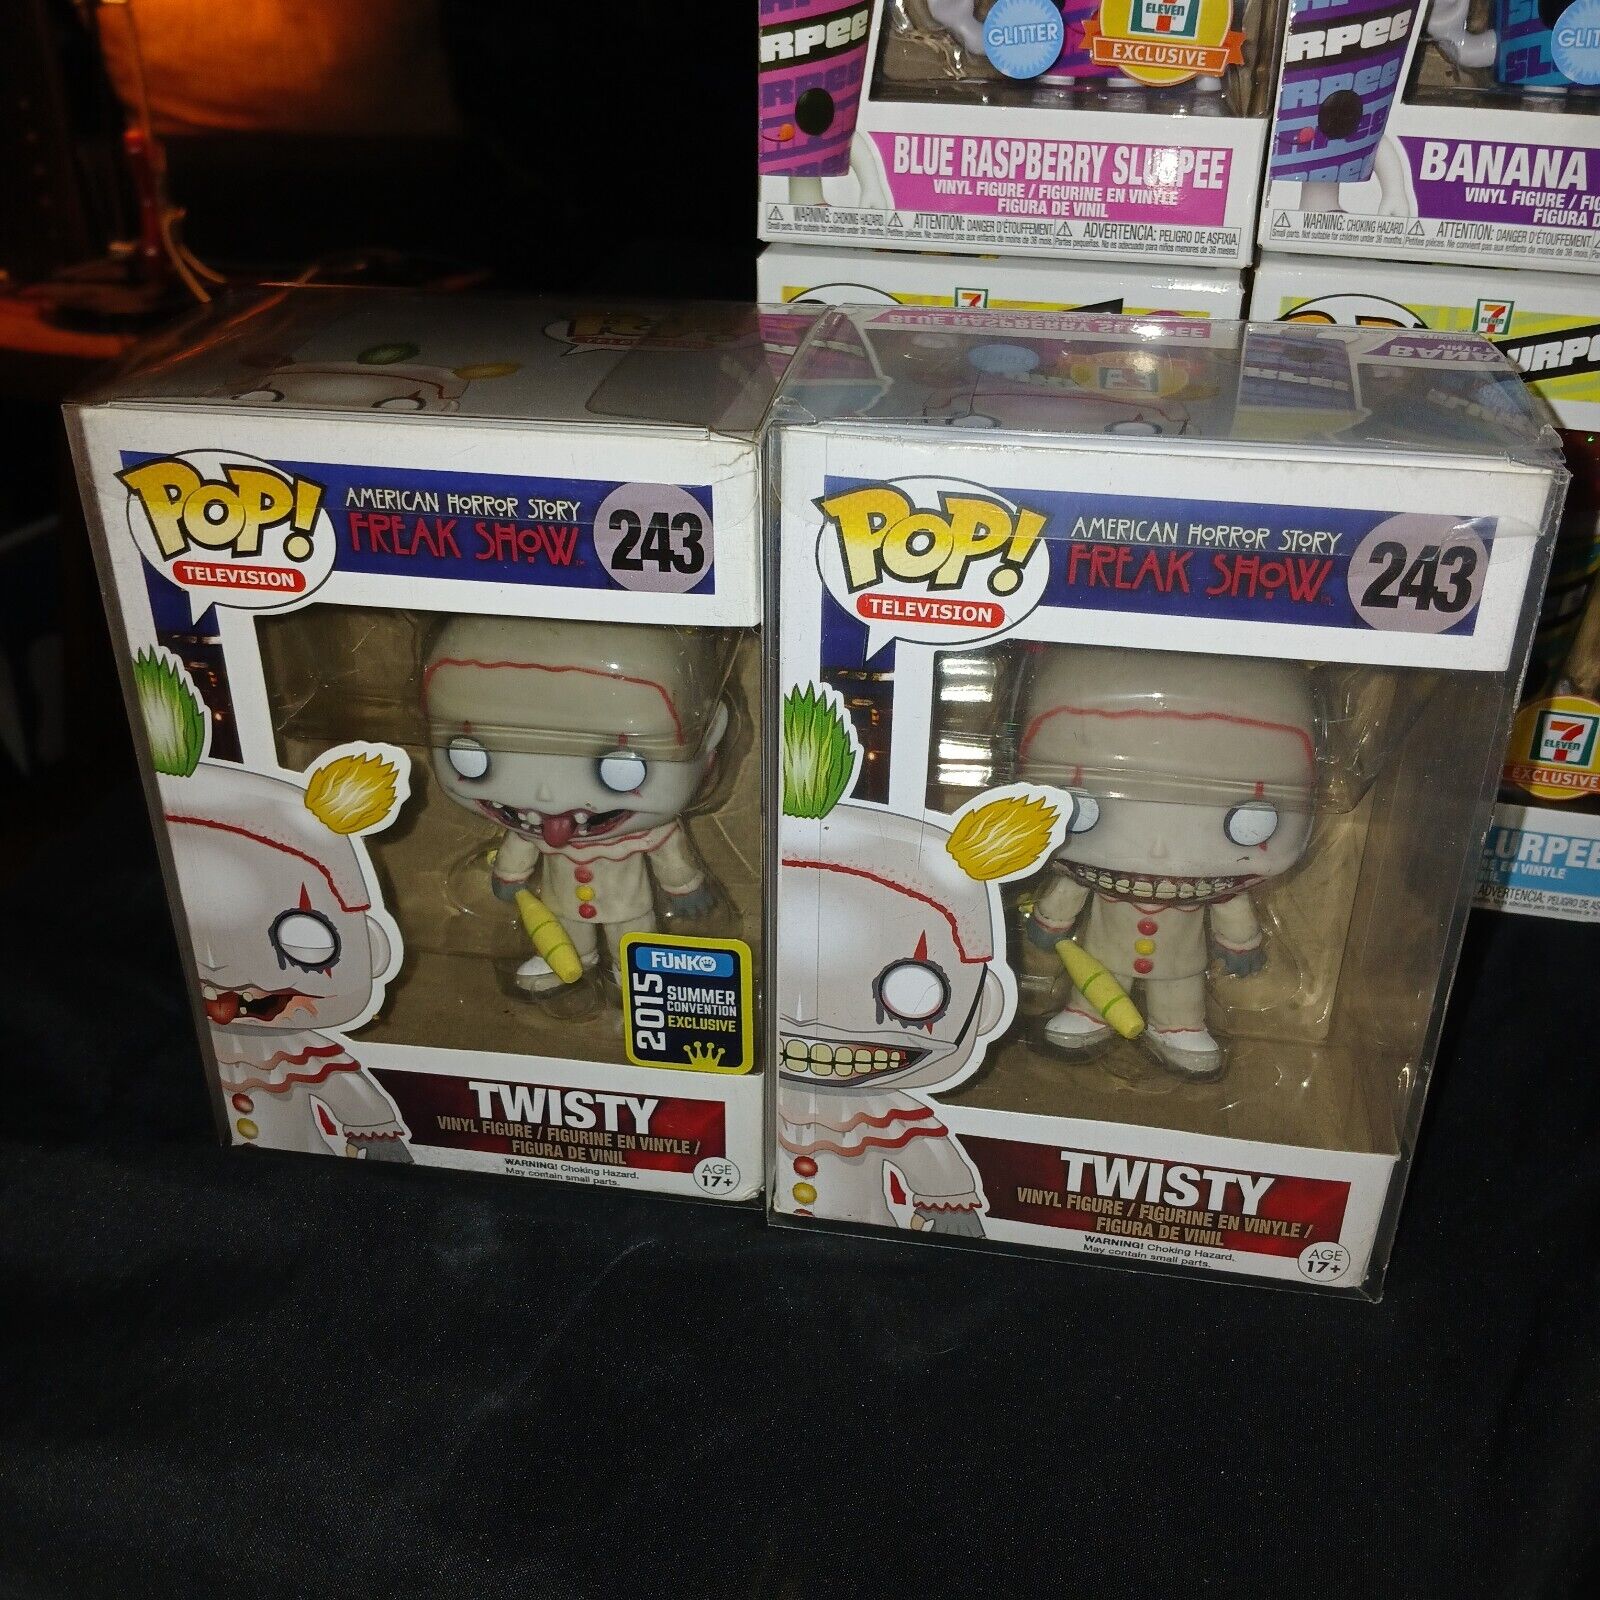 Funko Pop Ahs Twisty Set Of 2 Rare And Vaulted-SDCC 2015 Twisty 